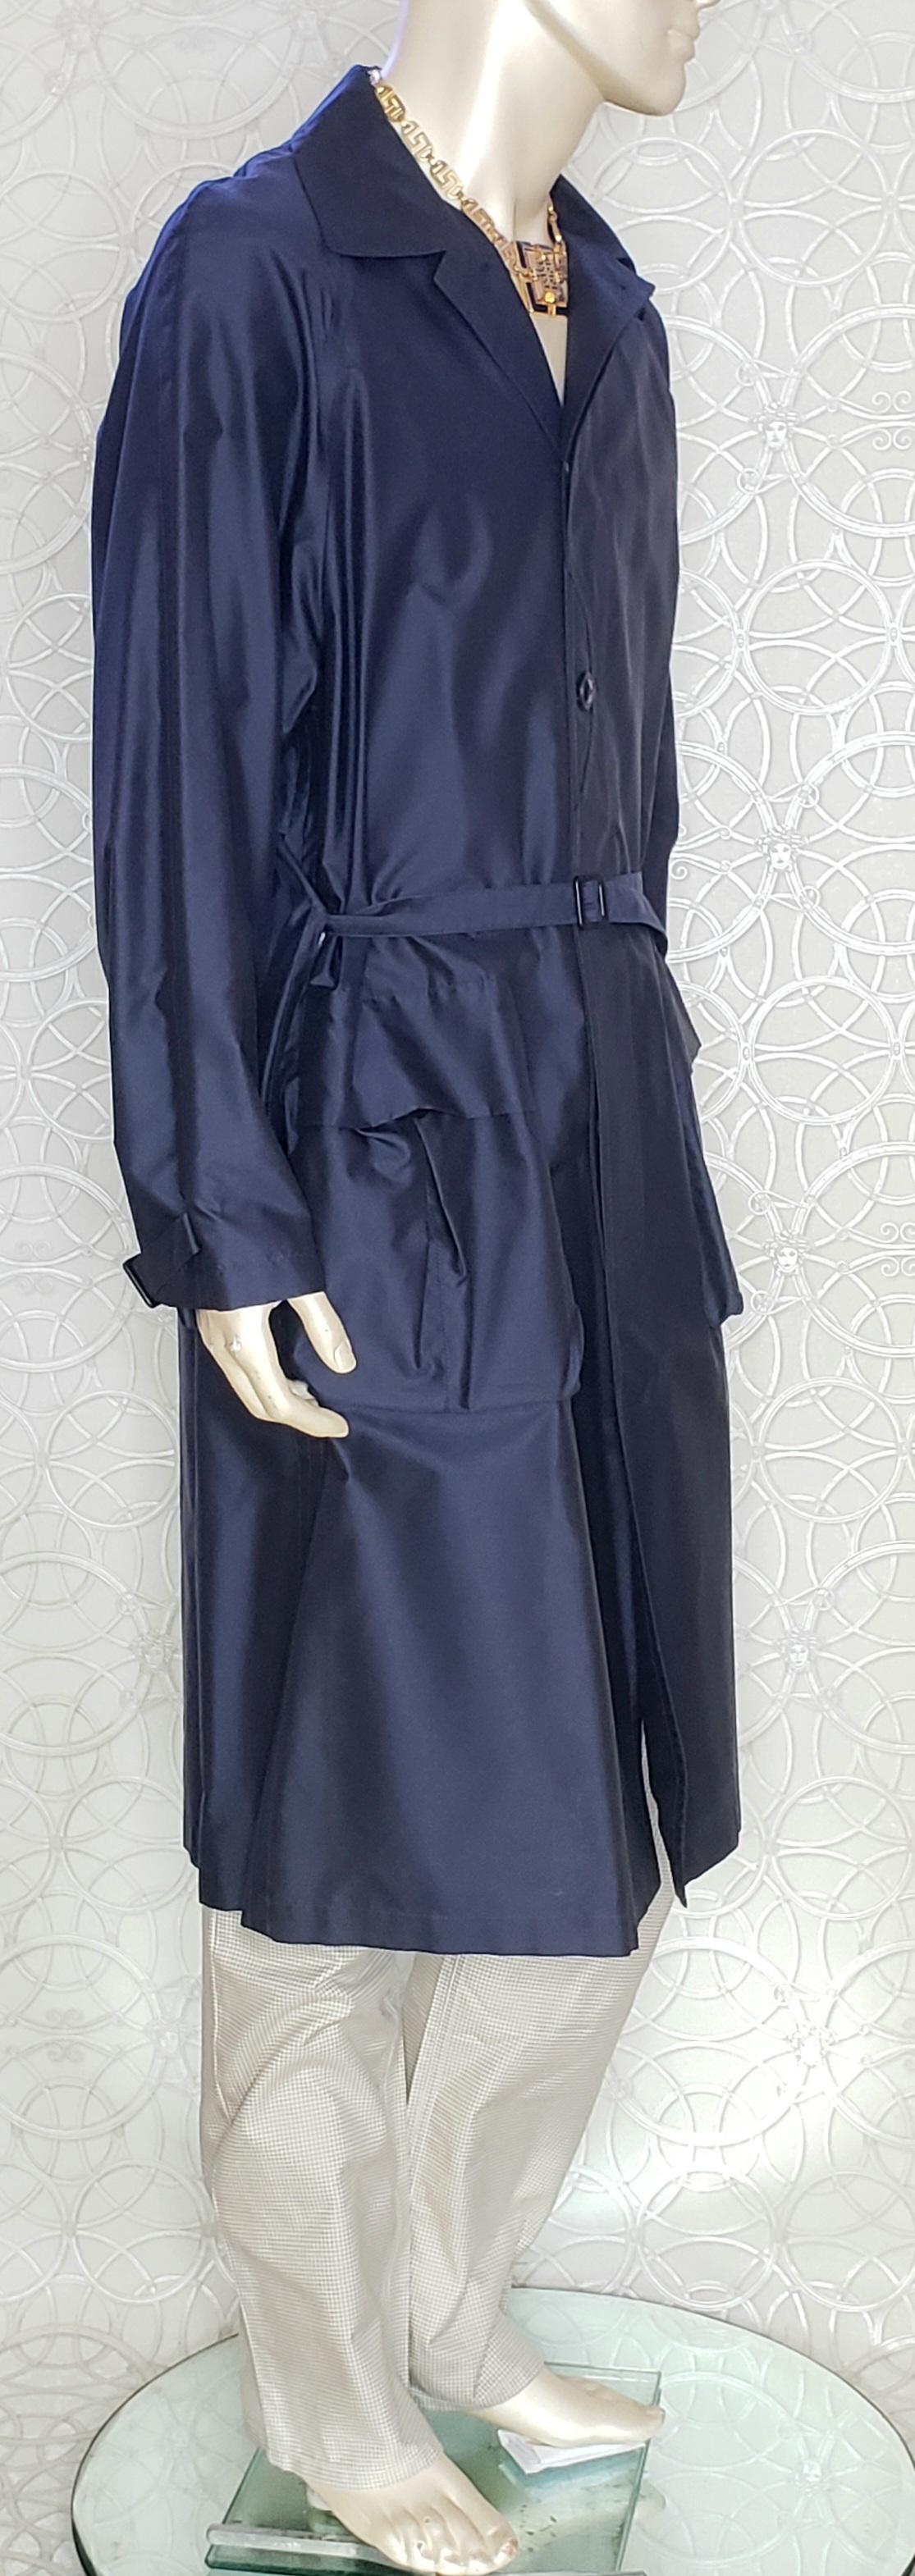 S/S 2016 Look # 34 VERSACE BELTED NAVY BLUE TRENCH SILK COAT 50 - 40 For Sale 3